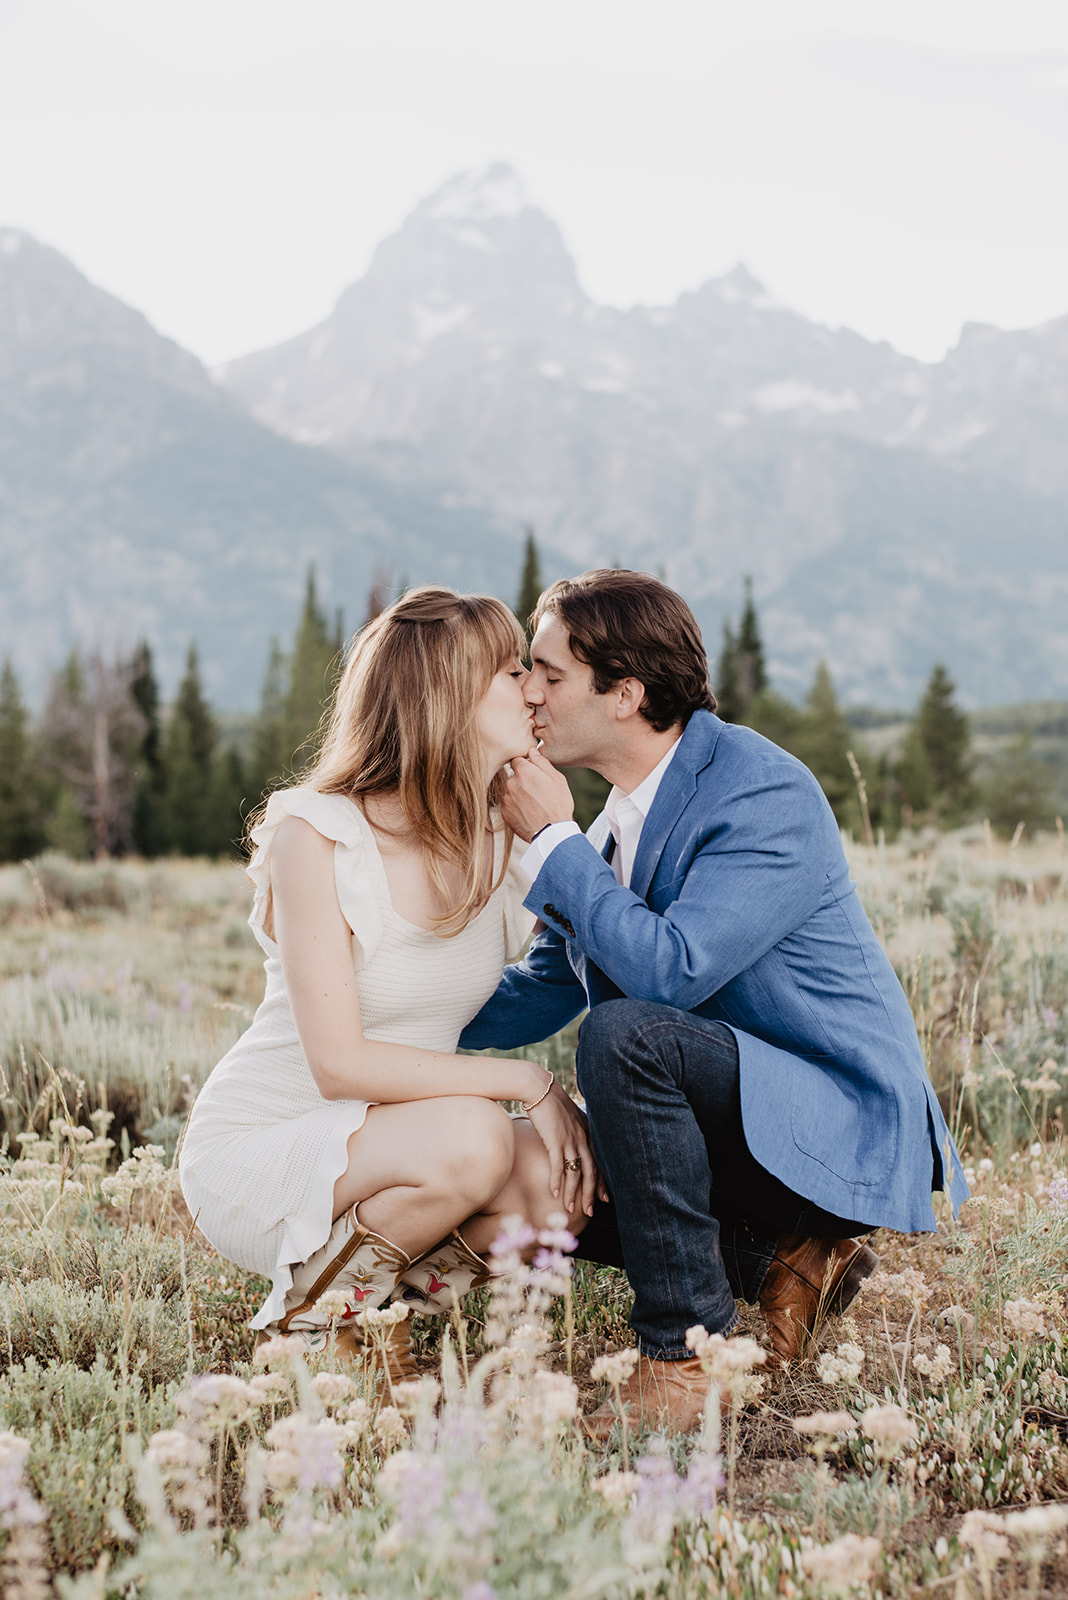 Jackson Hole photo tour engagement session with man and woman sitting in a meadow with the Tetons behind them as they kiss each other in their formal engagement photo outfits